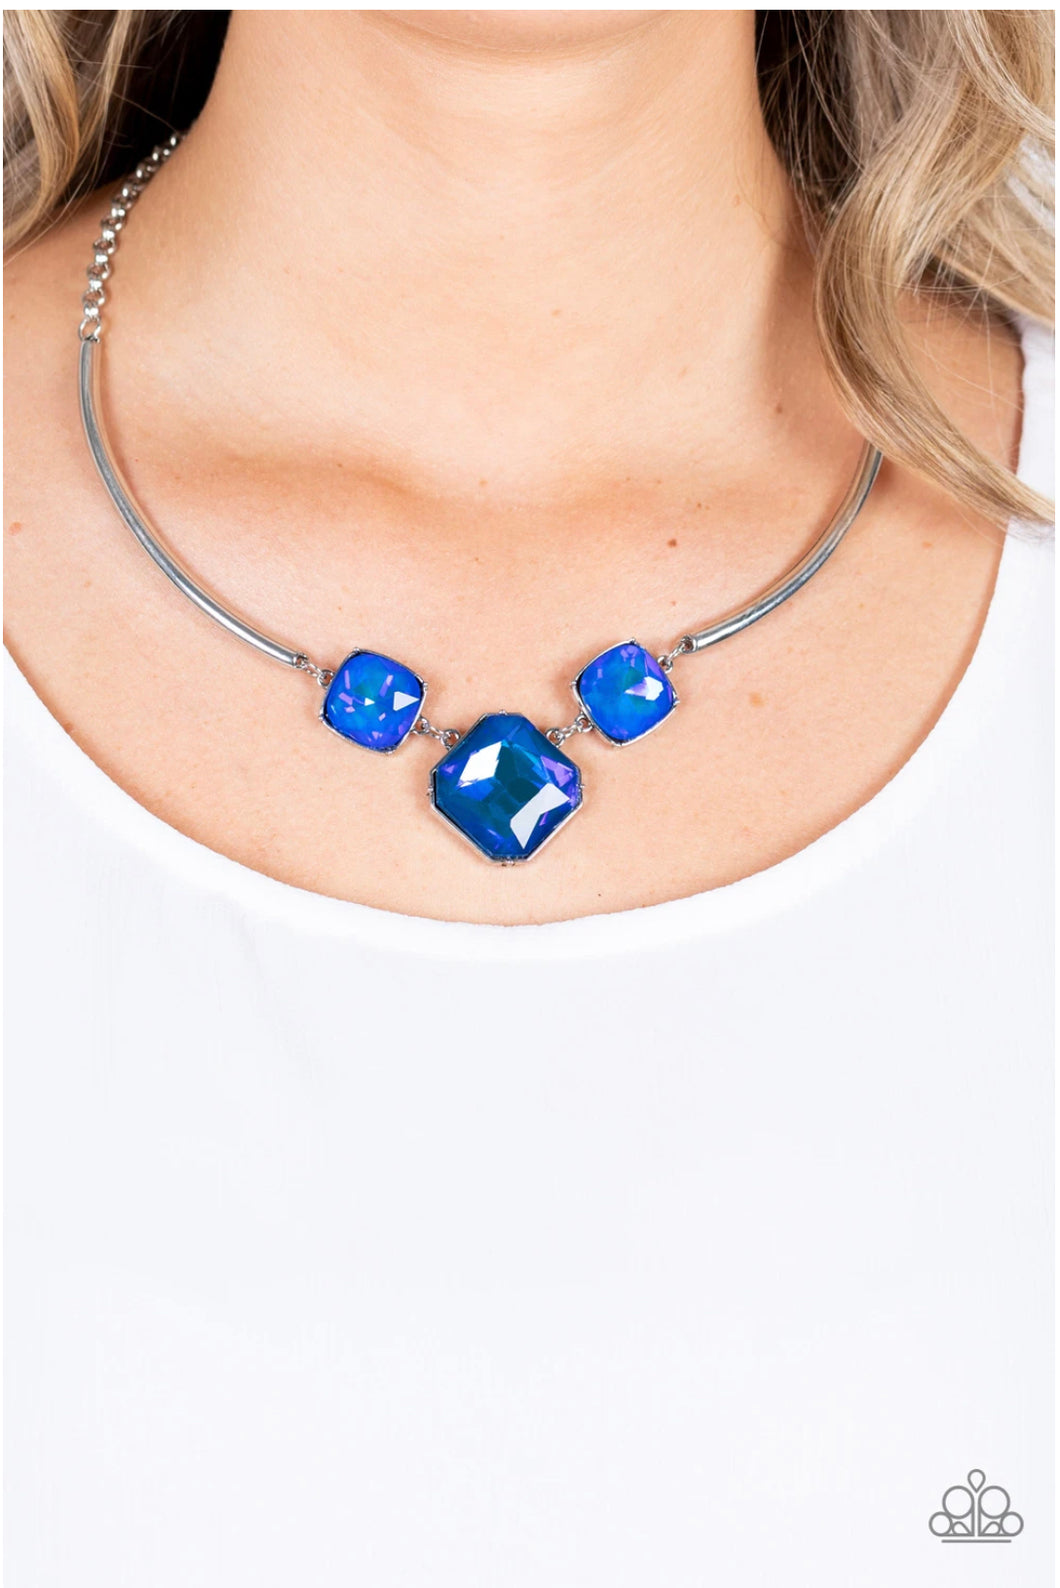 Paparazzi Divine IRIDESCENCE - Blue - Necklace & Earrings - LOP Exclusive October 2021